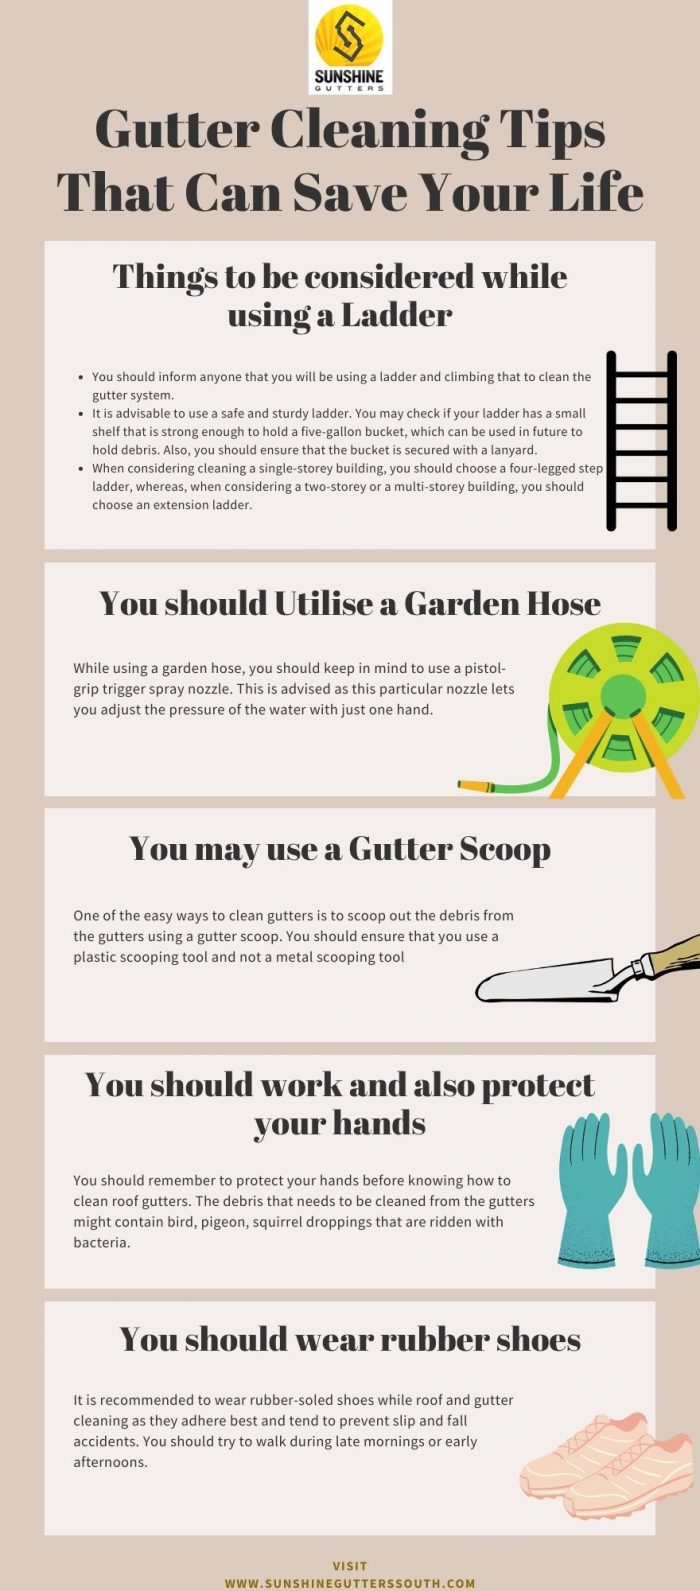 Gutter Cleaning: What Does It Include and Why Is It Important?